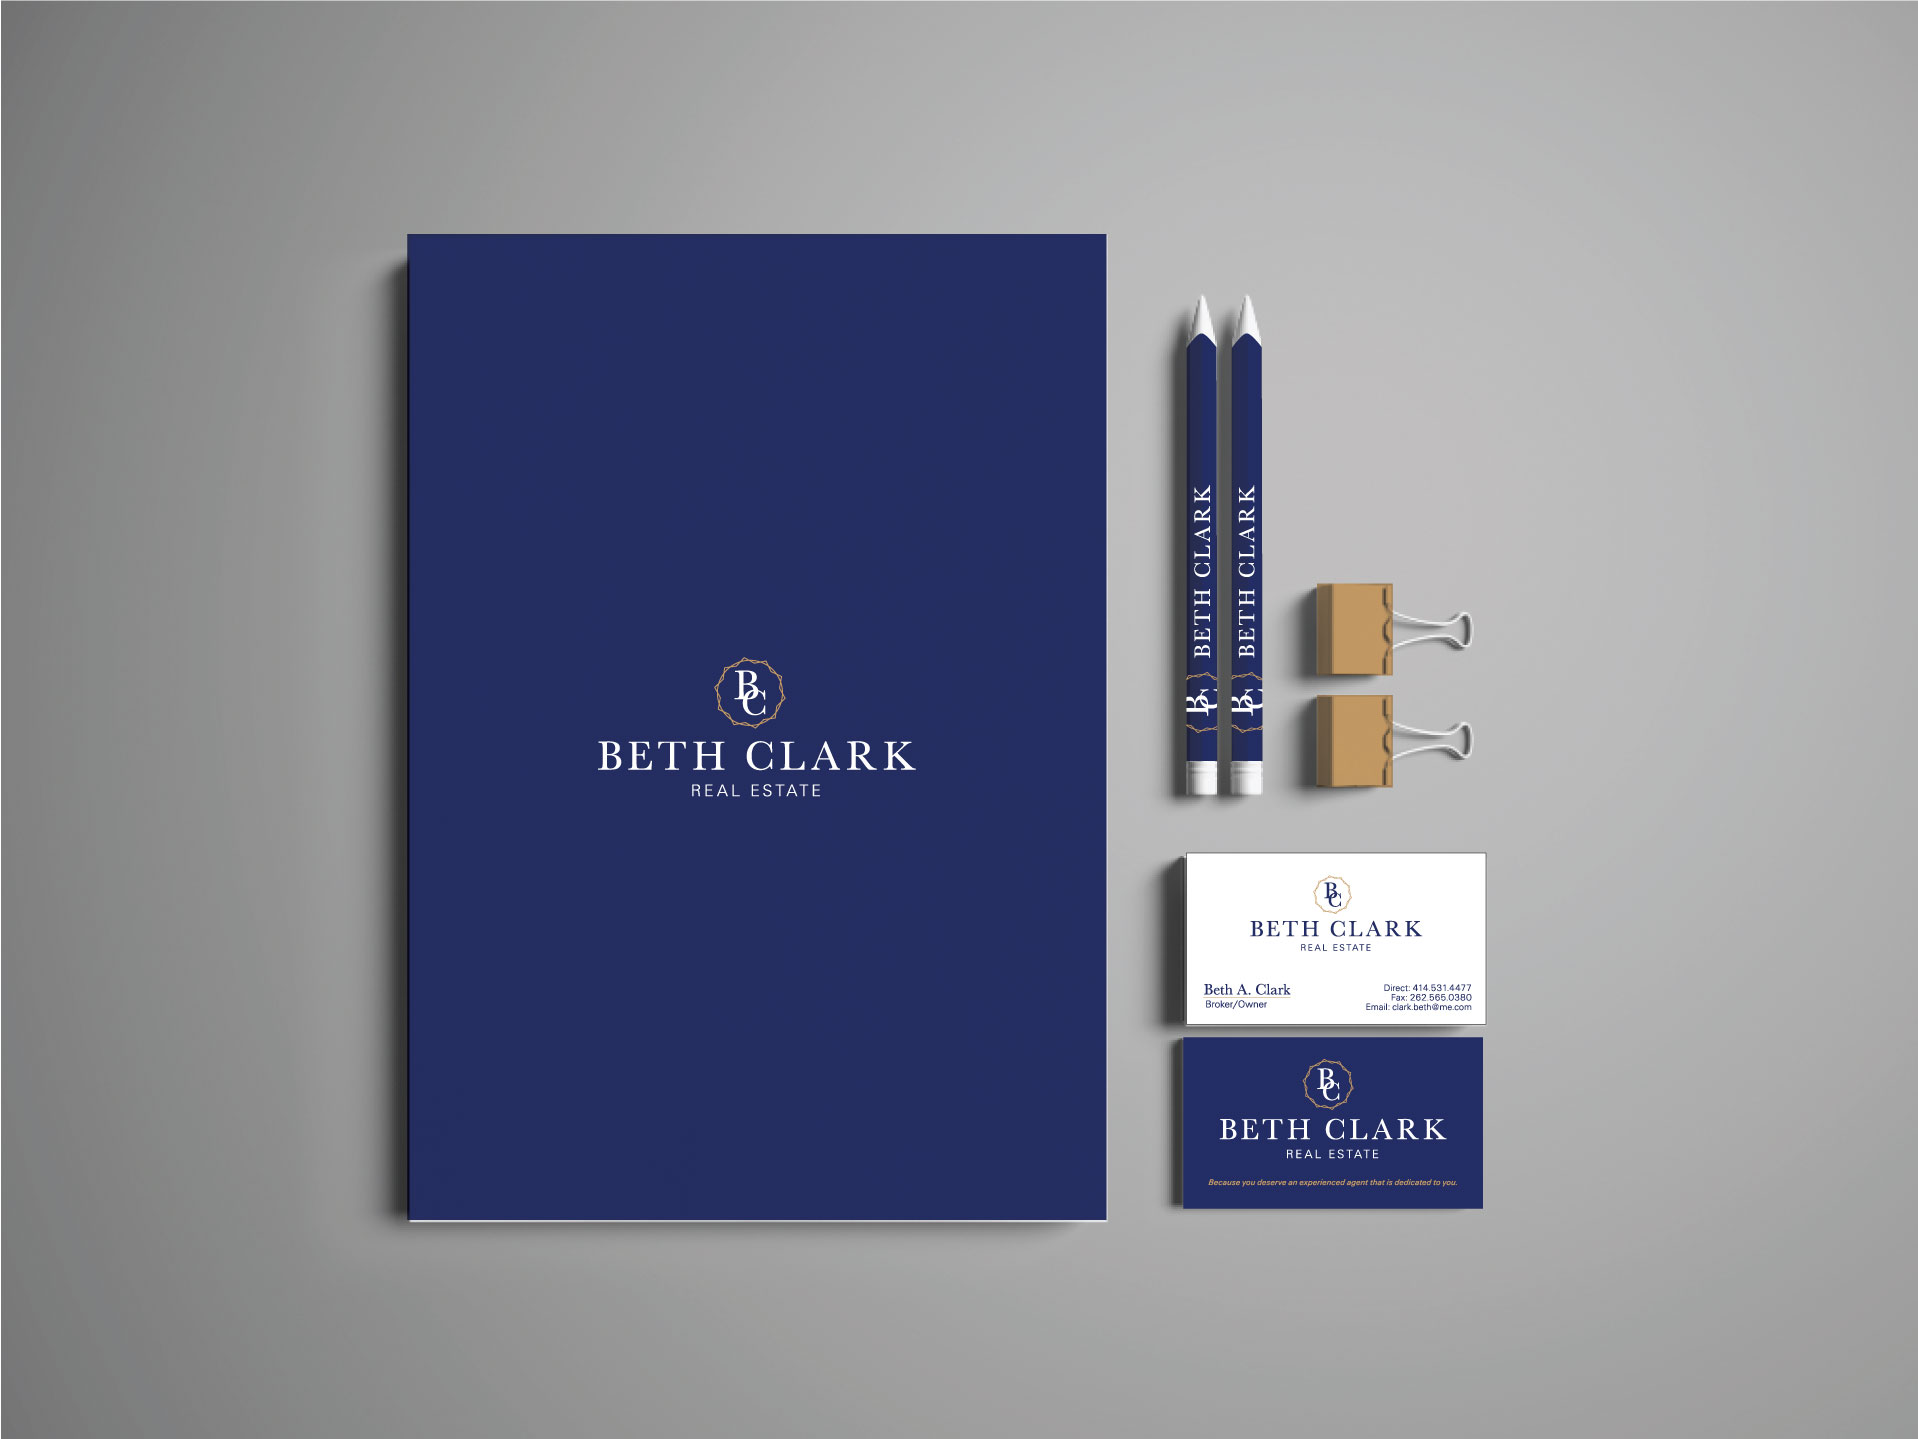 A folder, pencils, paper clips, and business cards used for advertising with printed logo and branding design